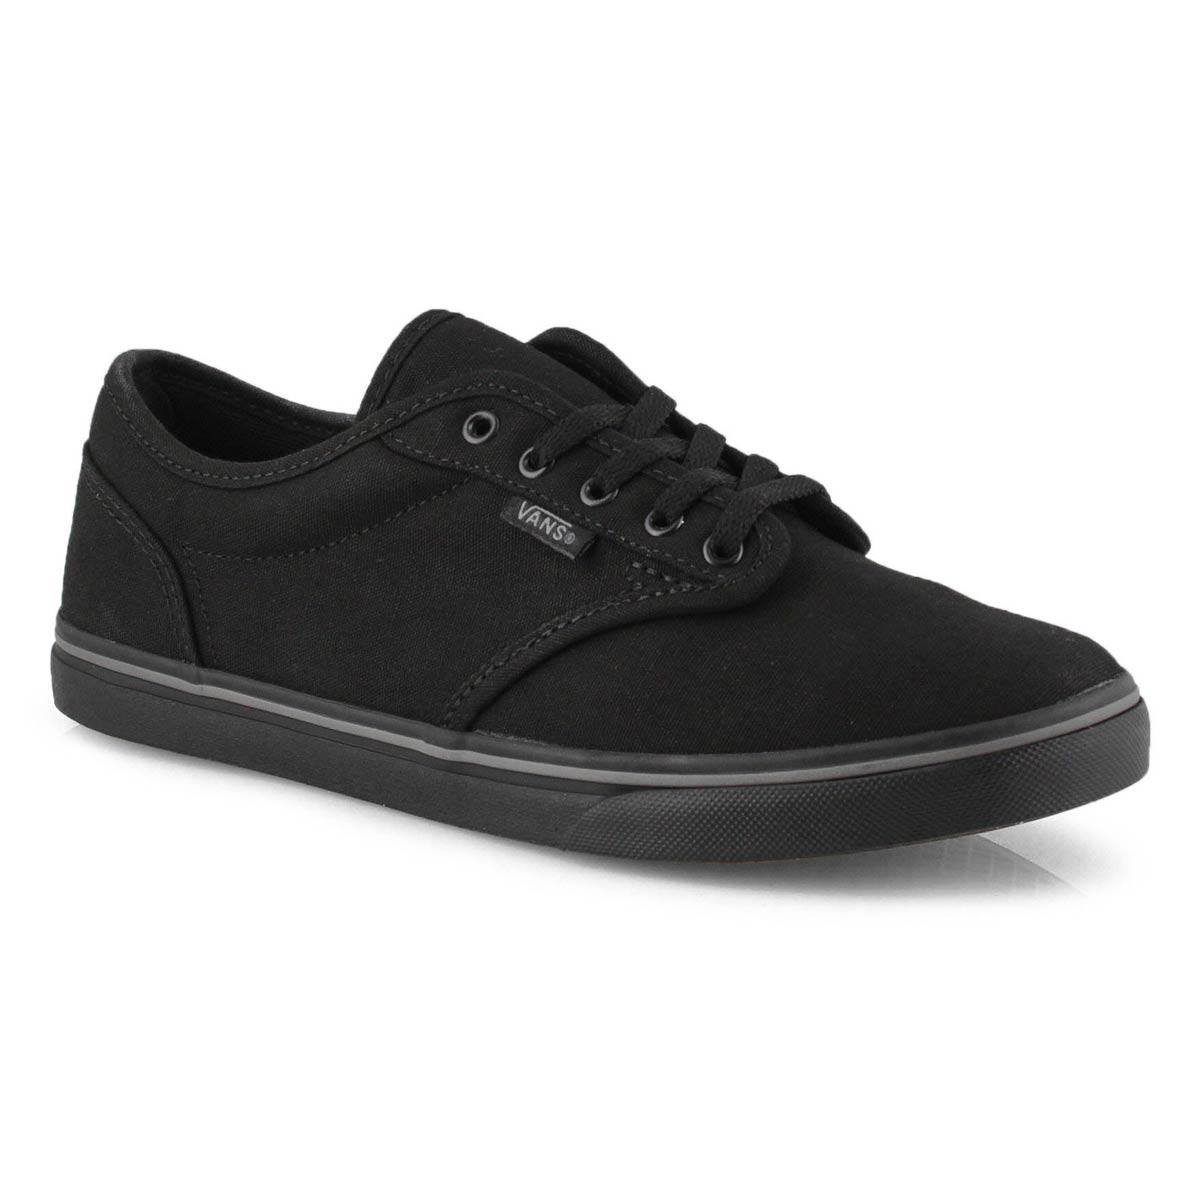 vans black and white atwood